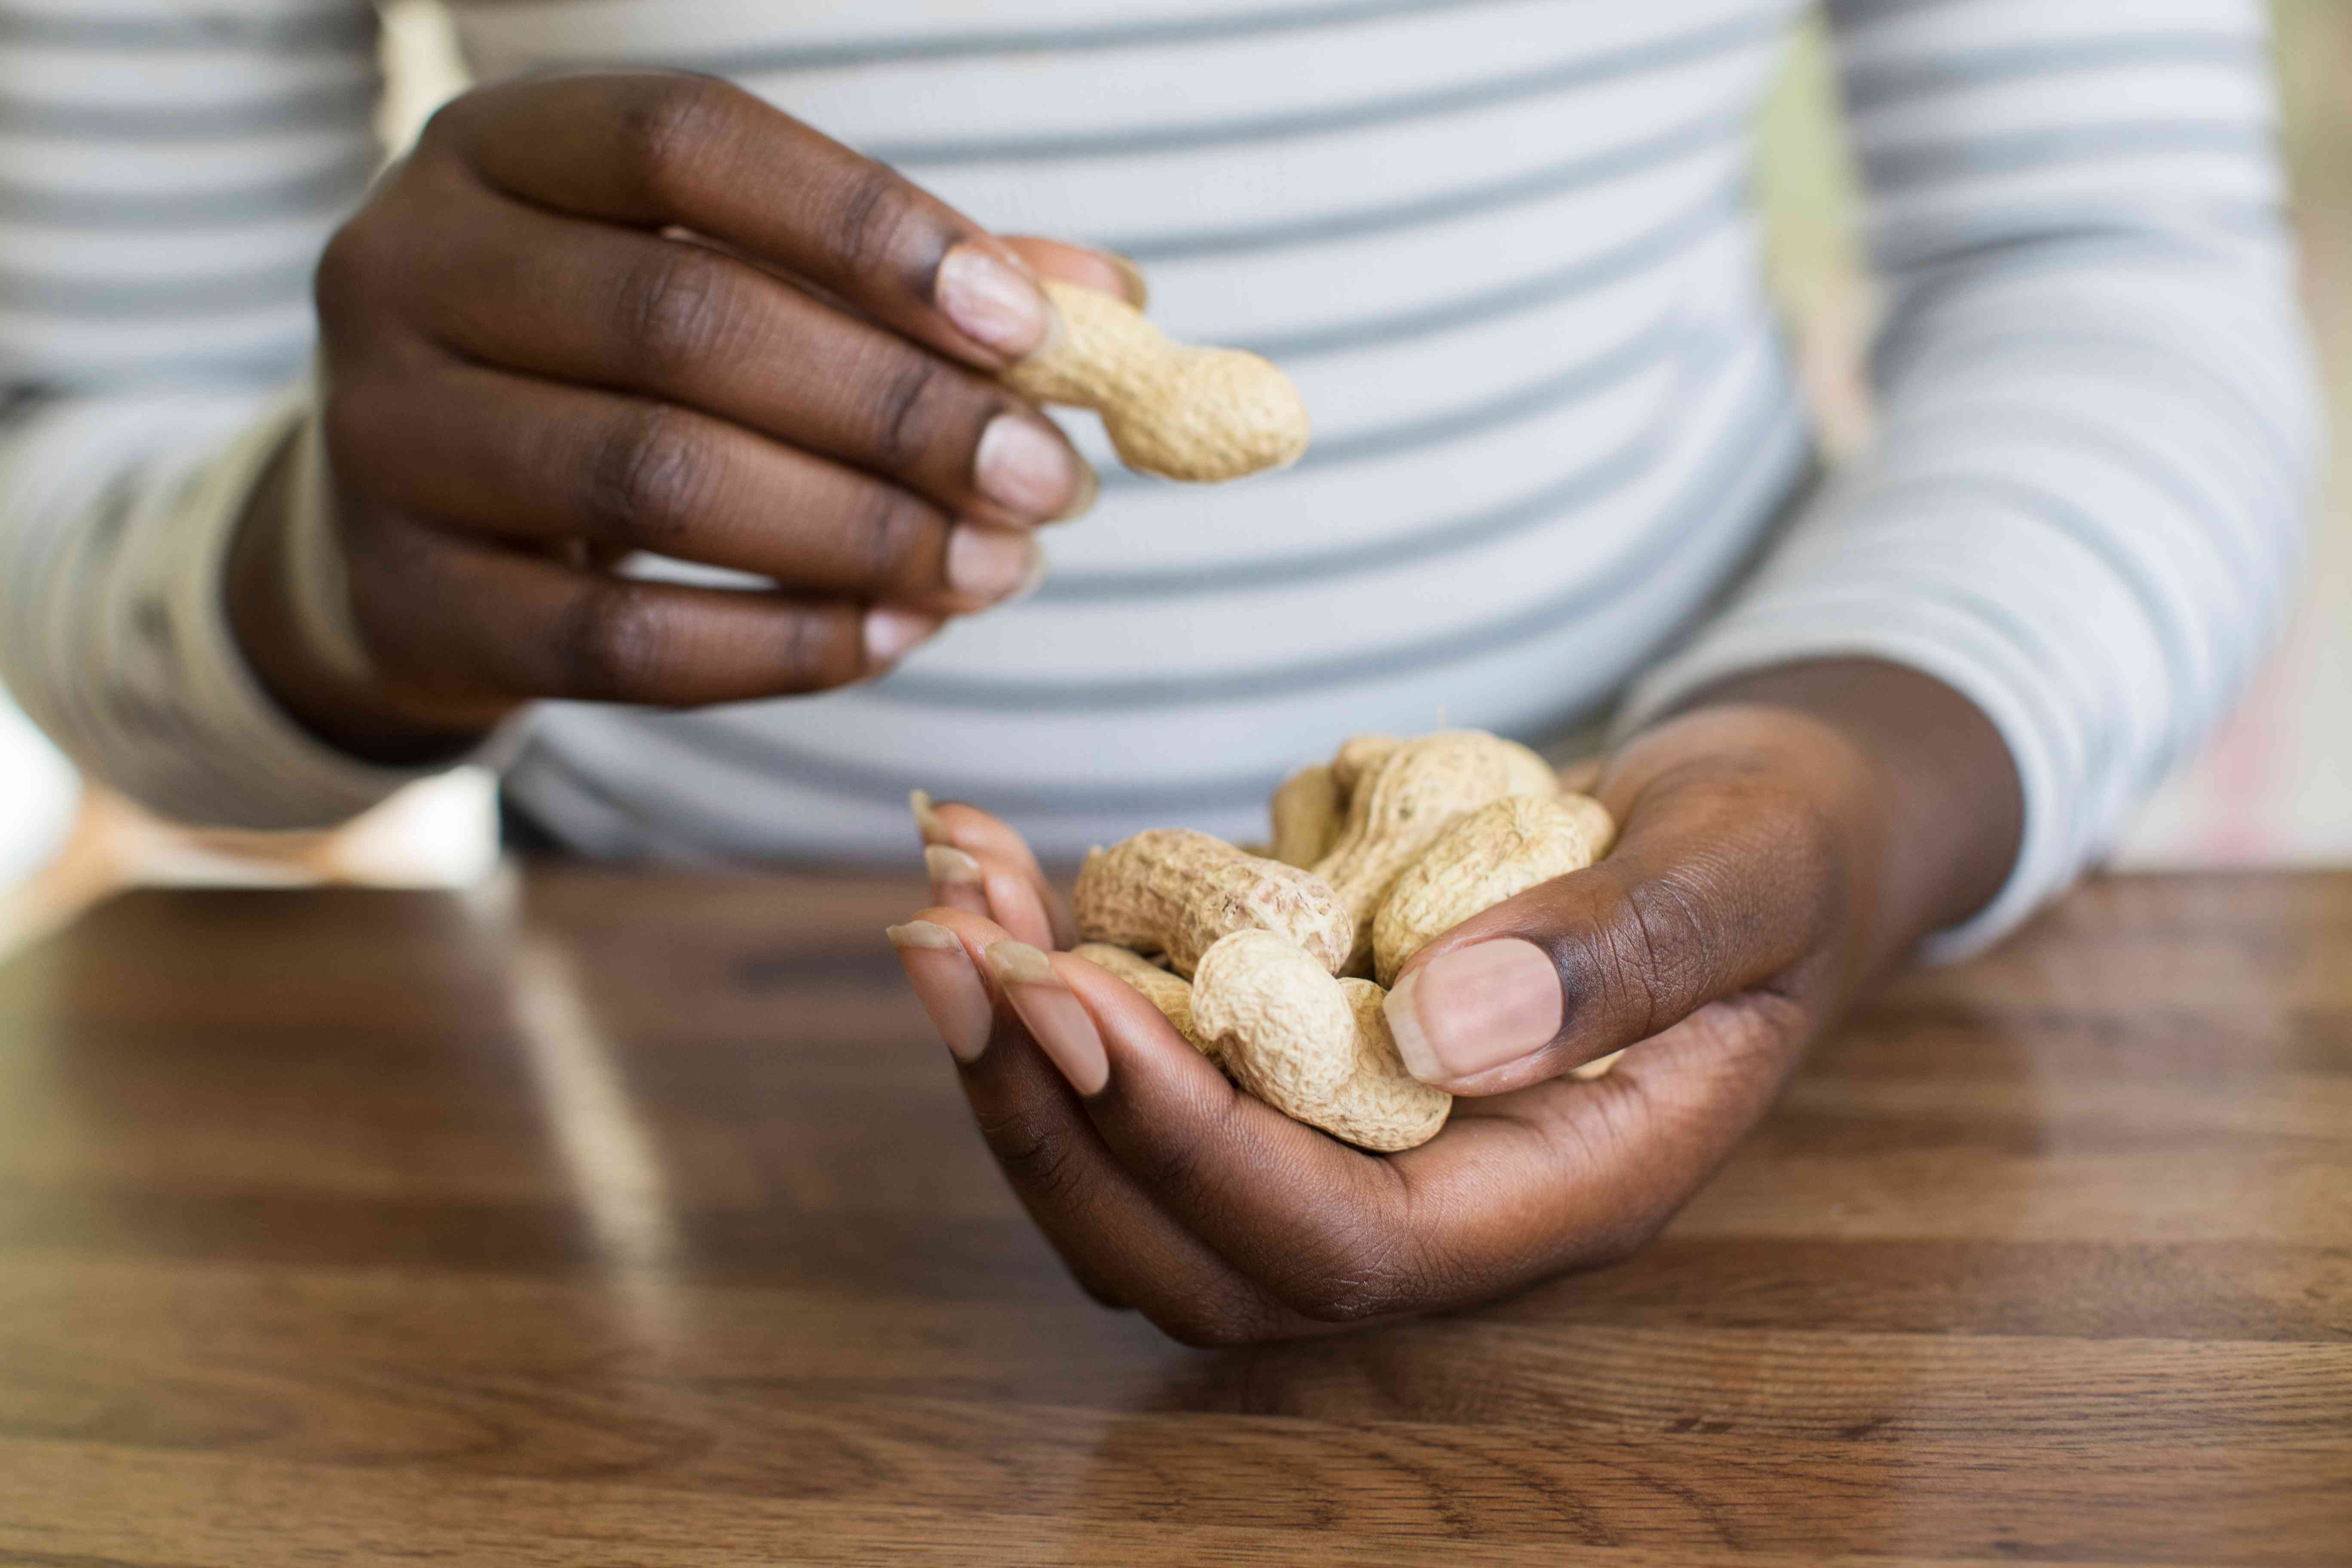 What Causes a Peanut Allergy?